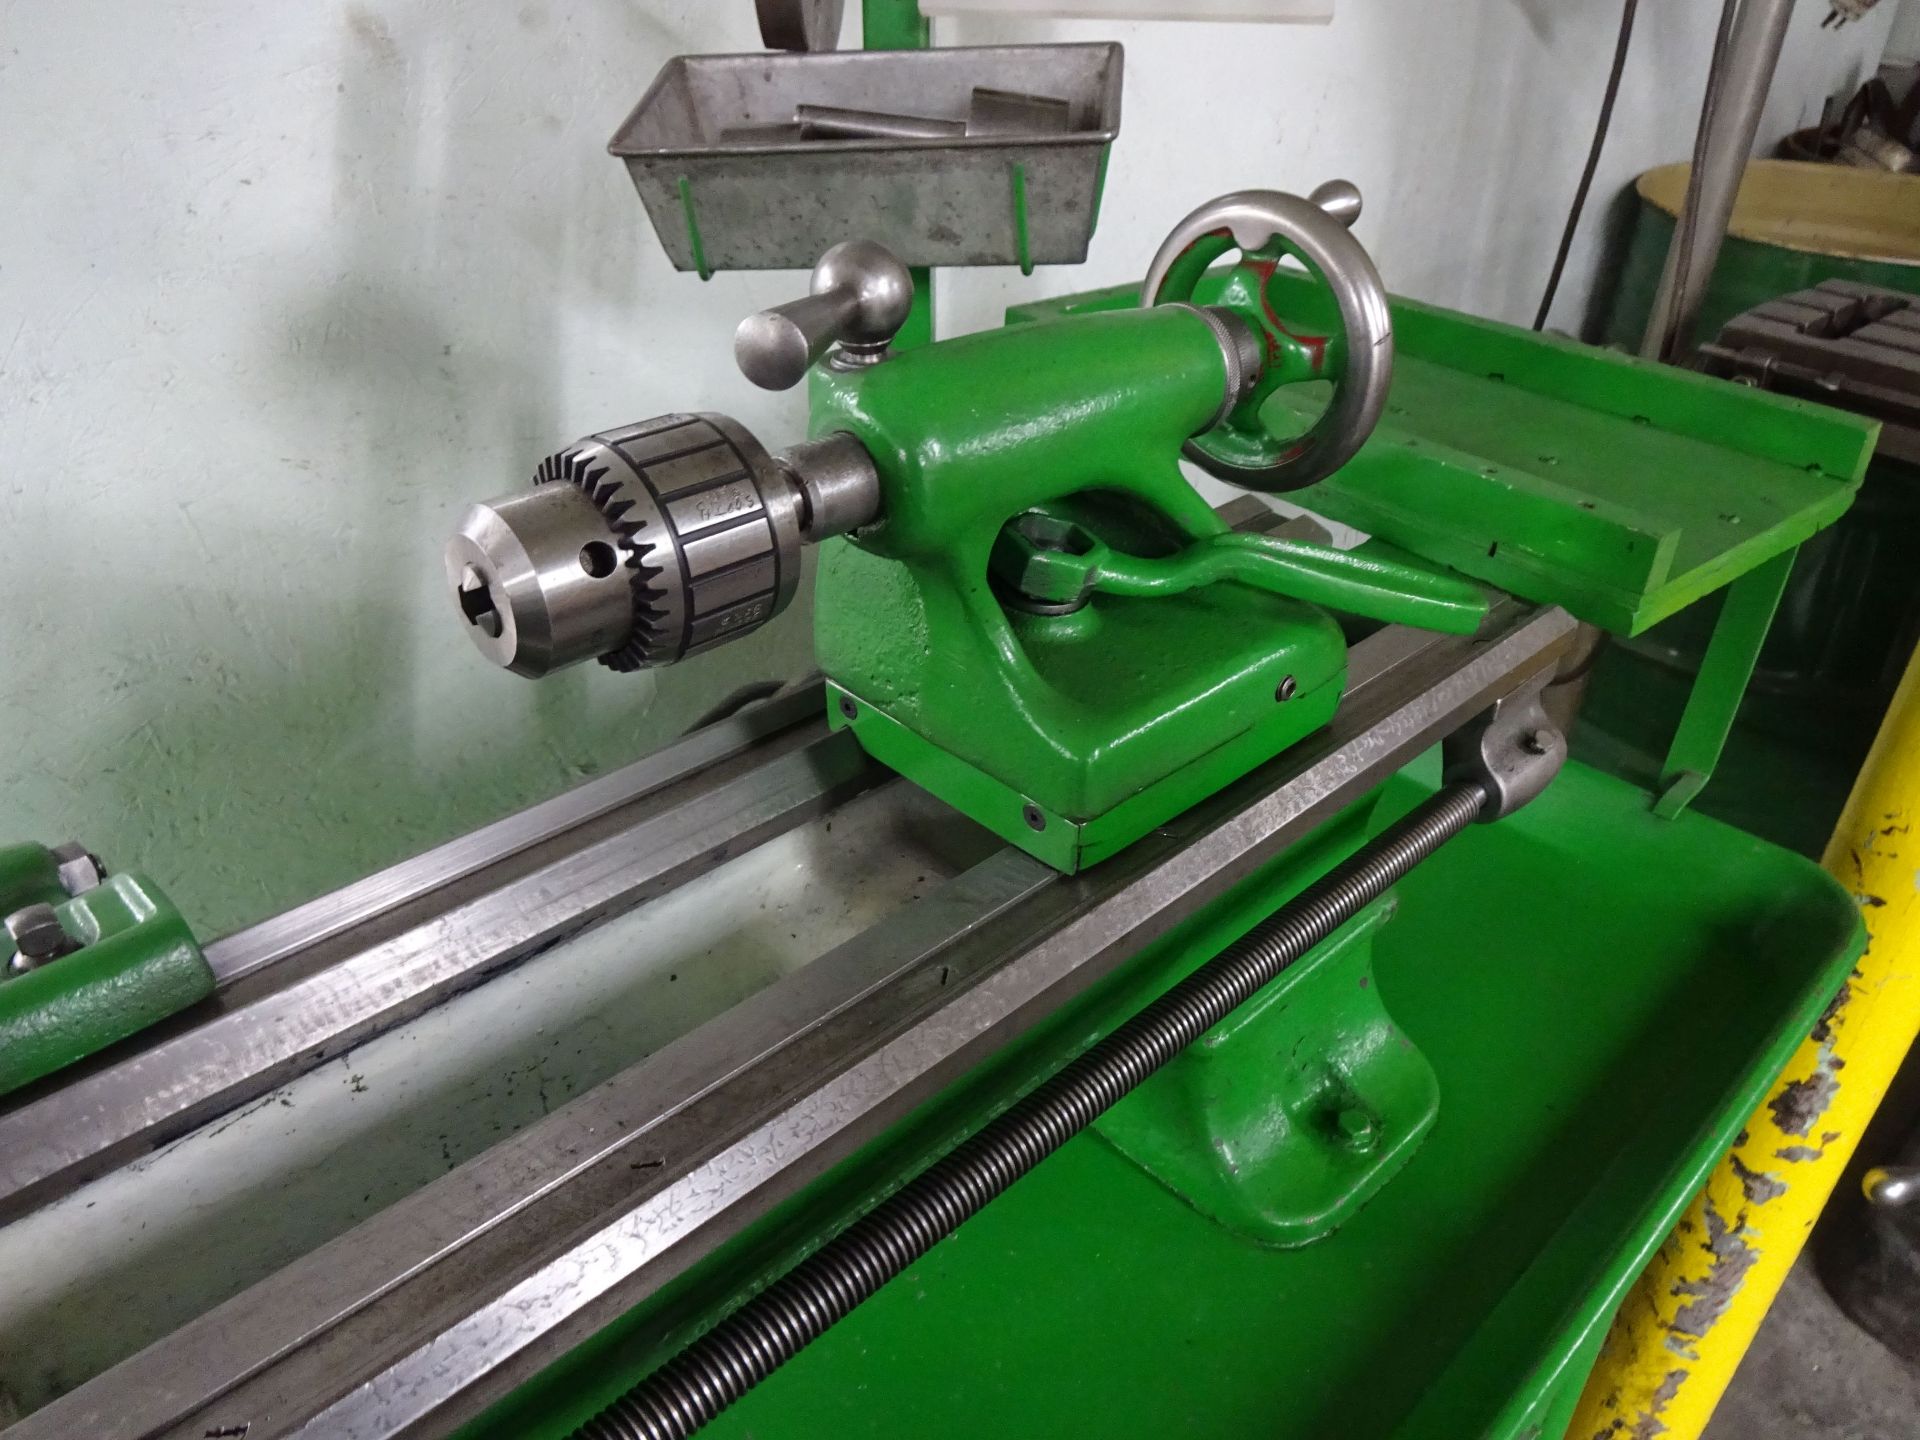 10" X 30" SOUTH BEND ENGINE LATHE; S/N 1036RKL8, COLLET CHUCK, STEADY REST, TOOLHOLDER - Image 5 of 7